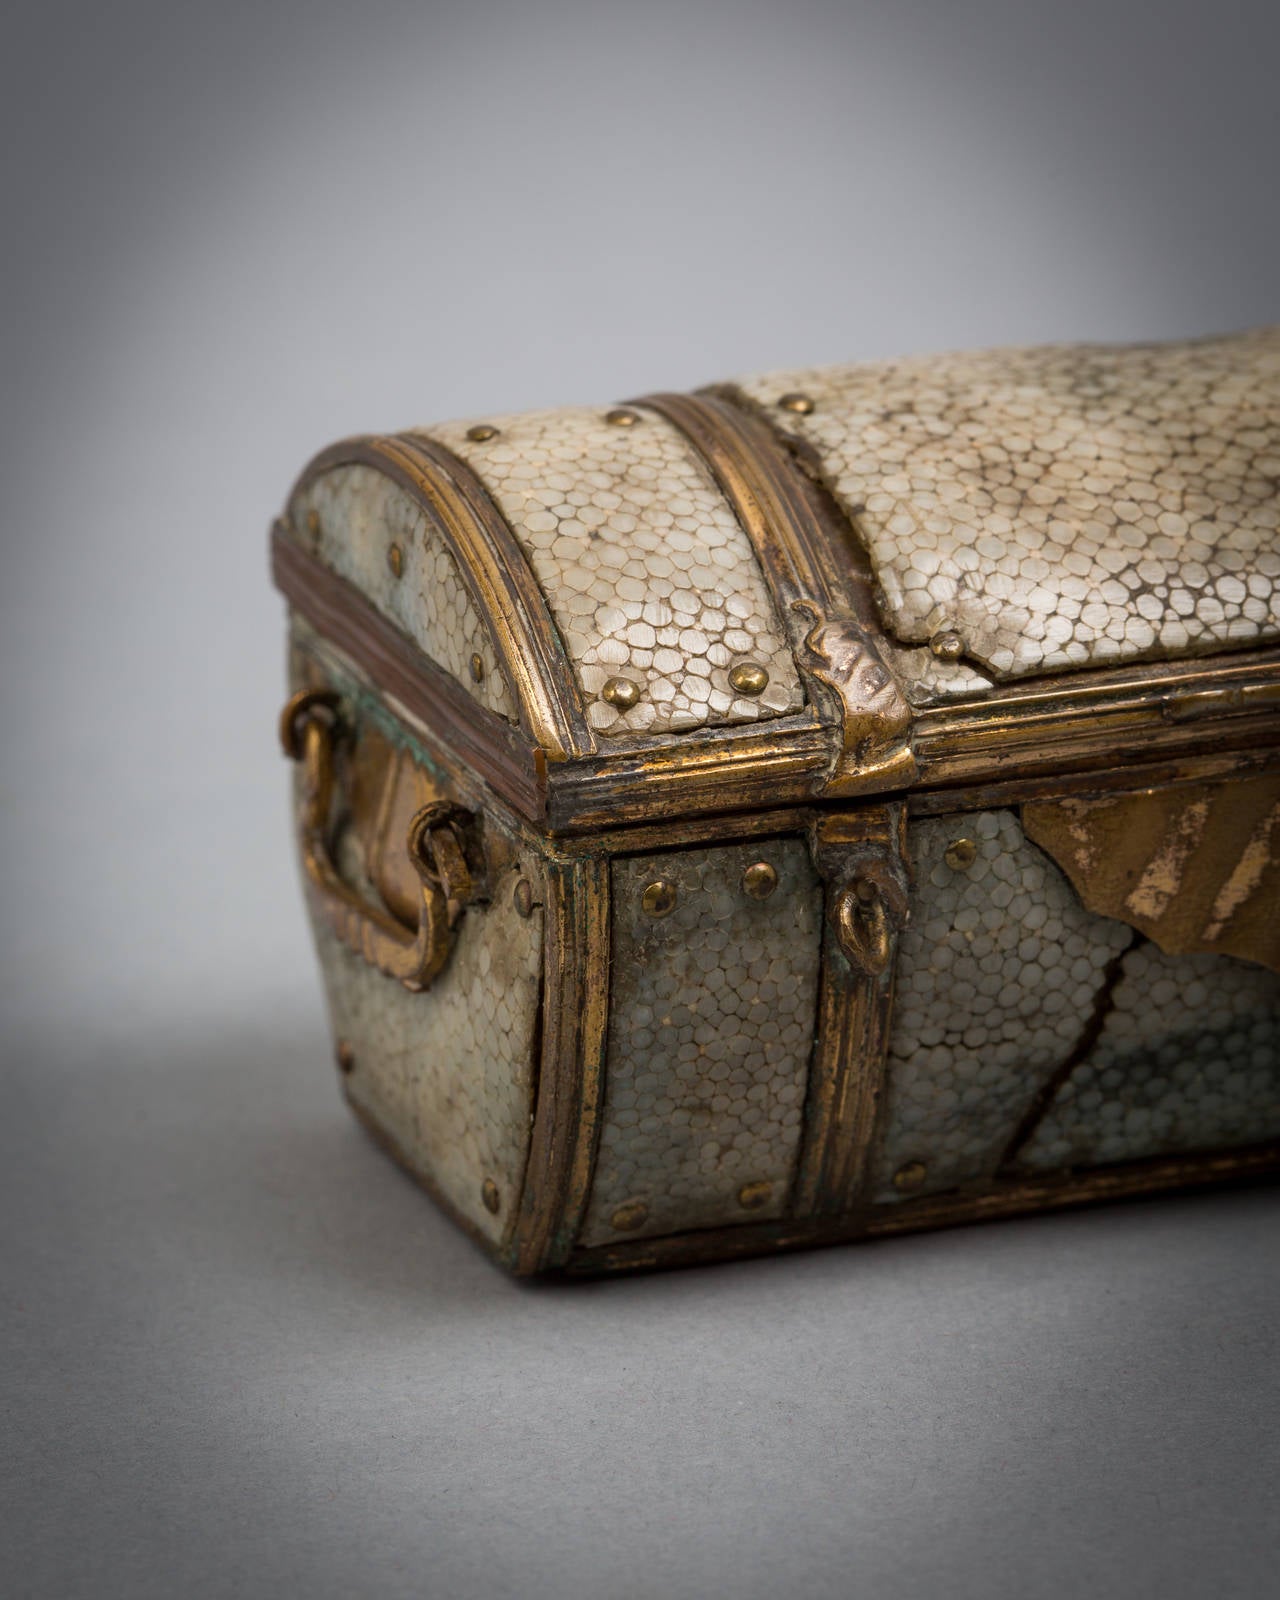 Antique shagreen and brass trunk-form box, 18th century.